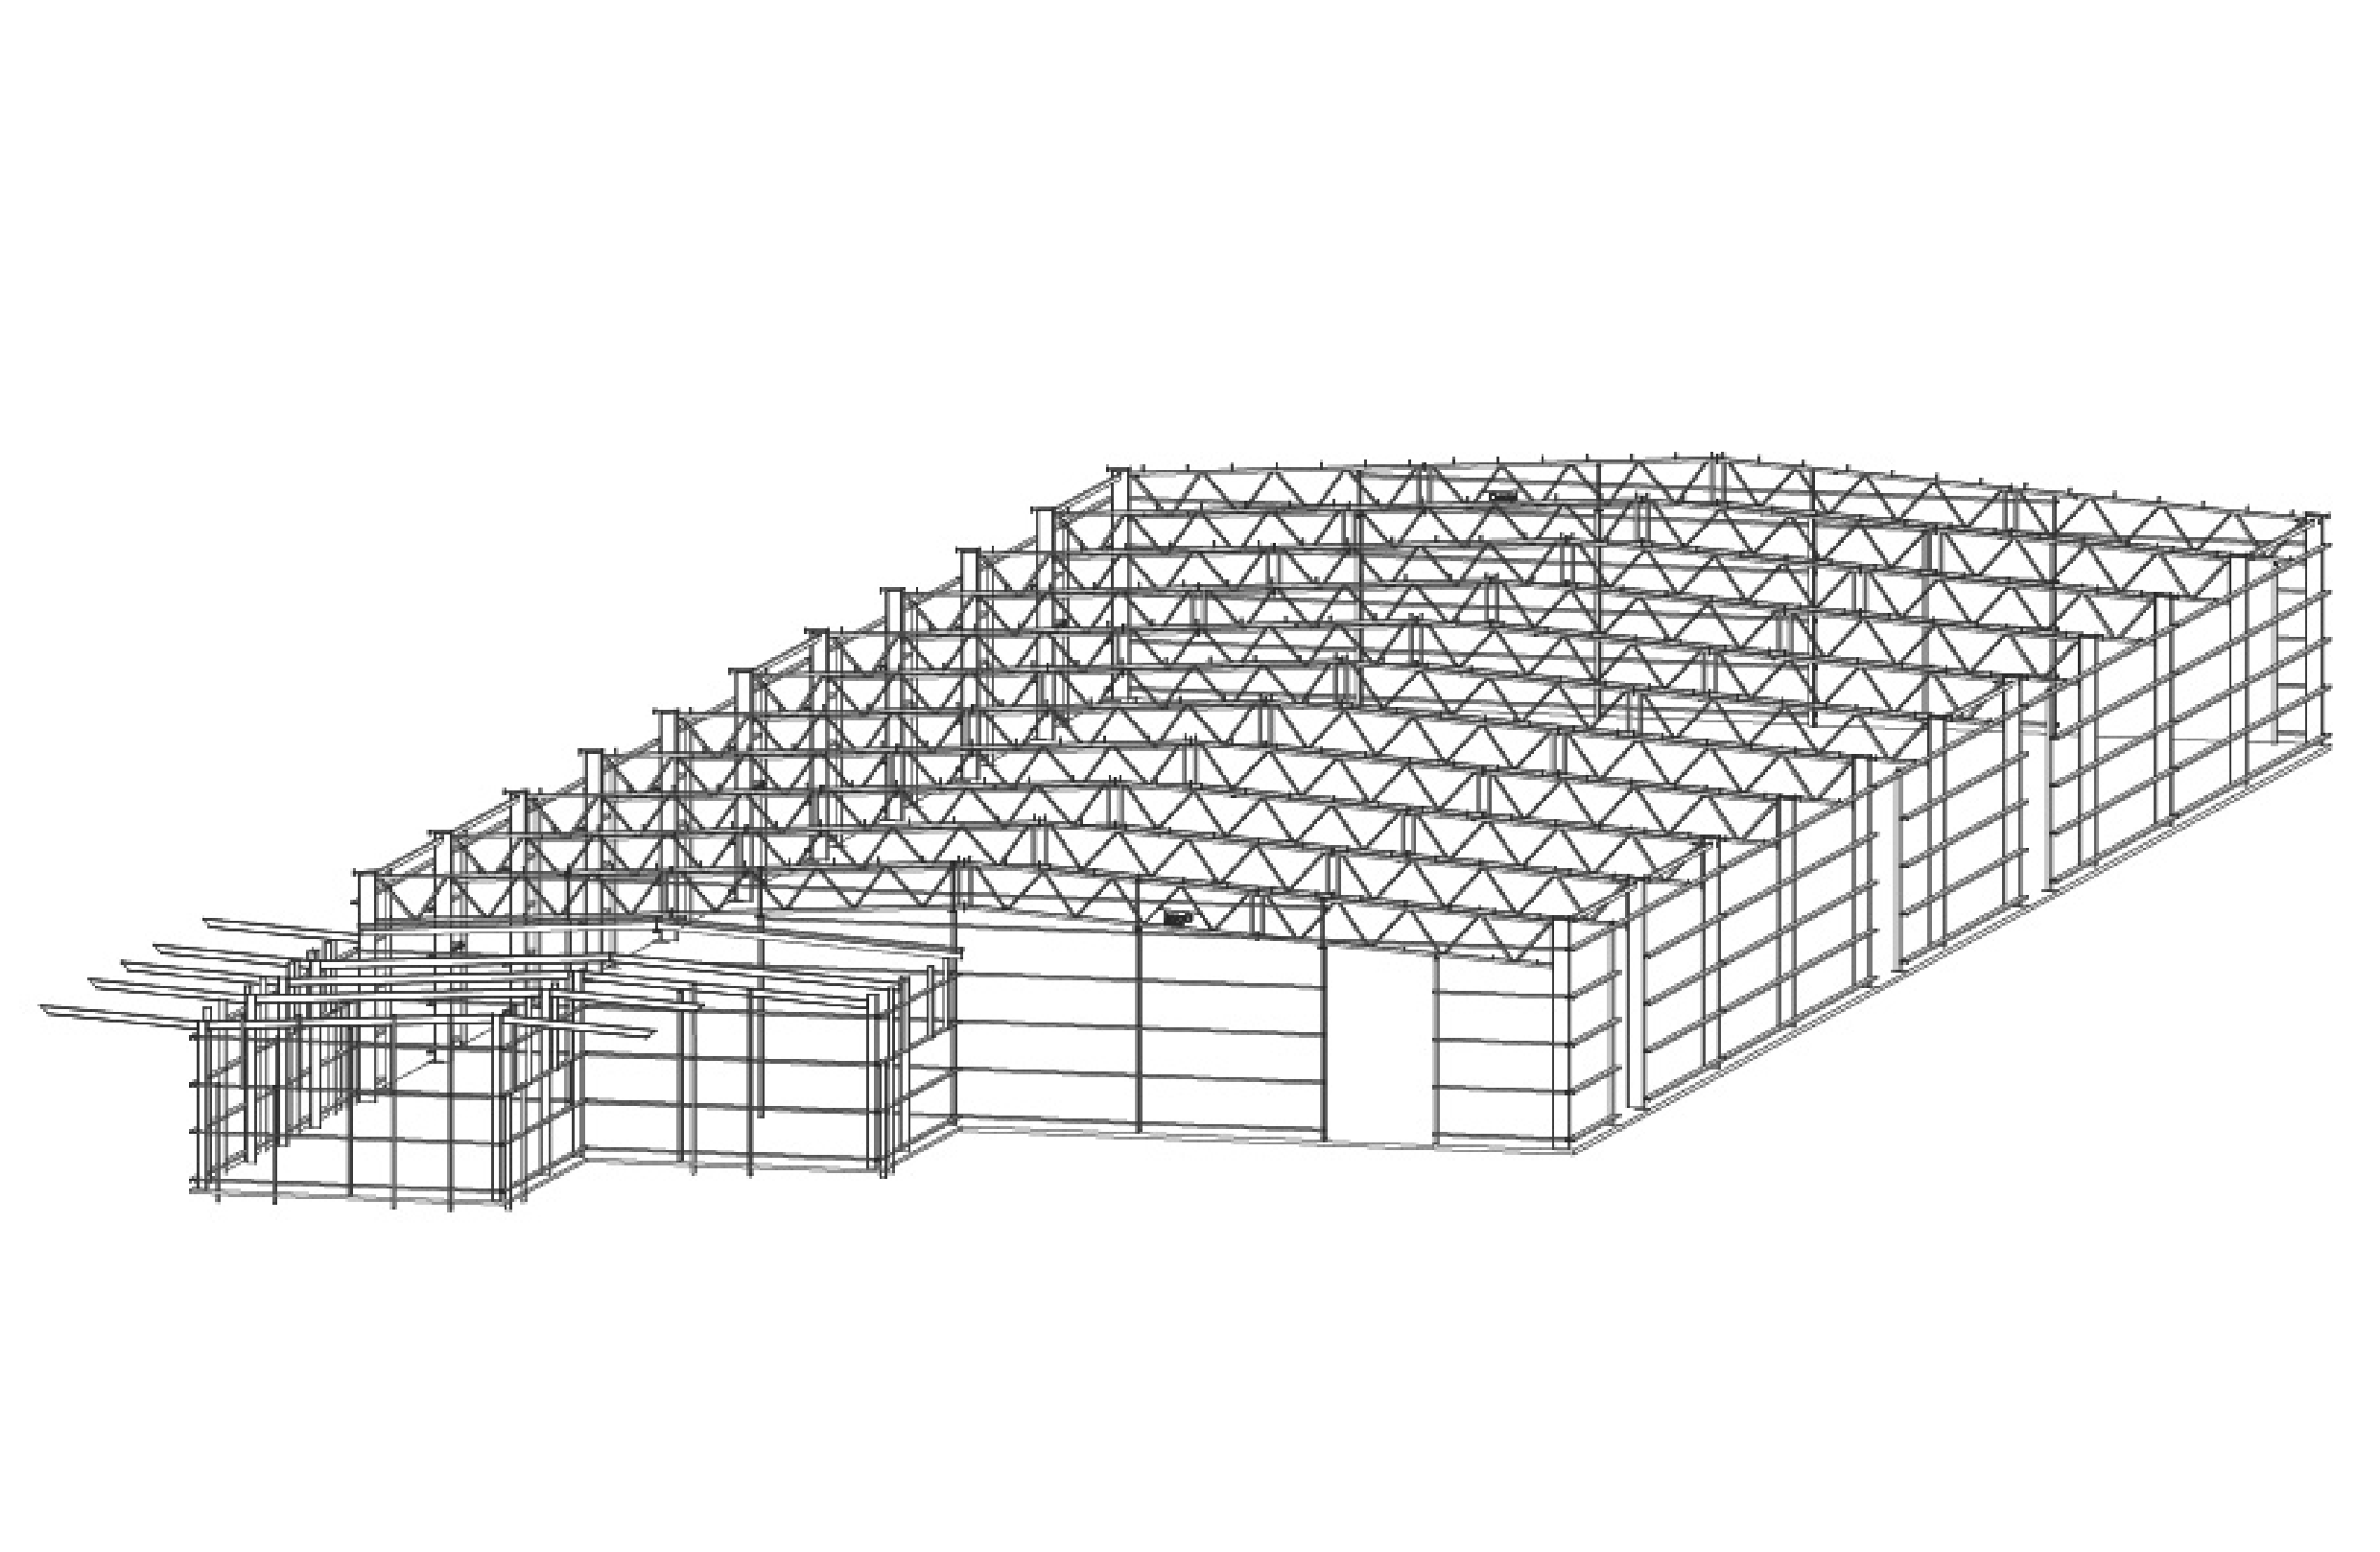 Western Region Waste and Recycling shed drawings